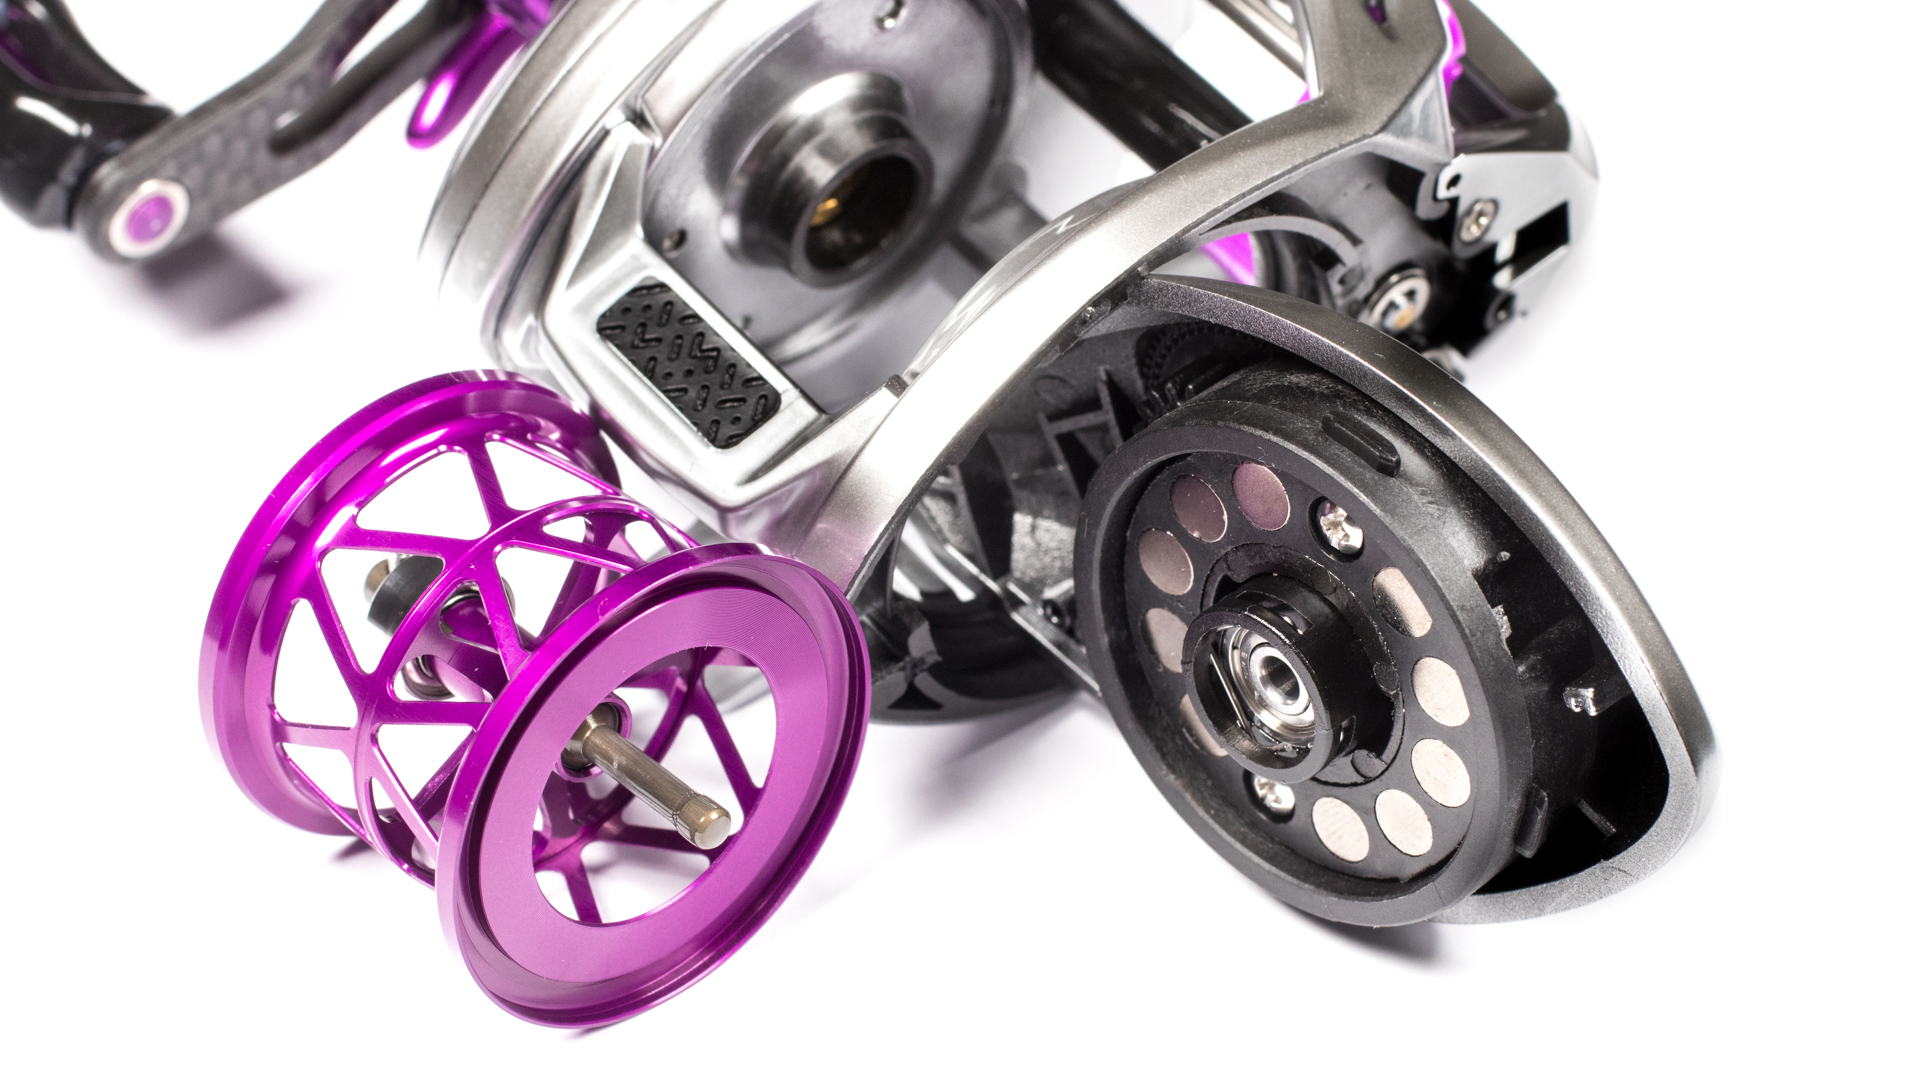 Magtrax style brakes on the Castfanatic B1 affordable BFS reel